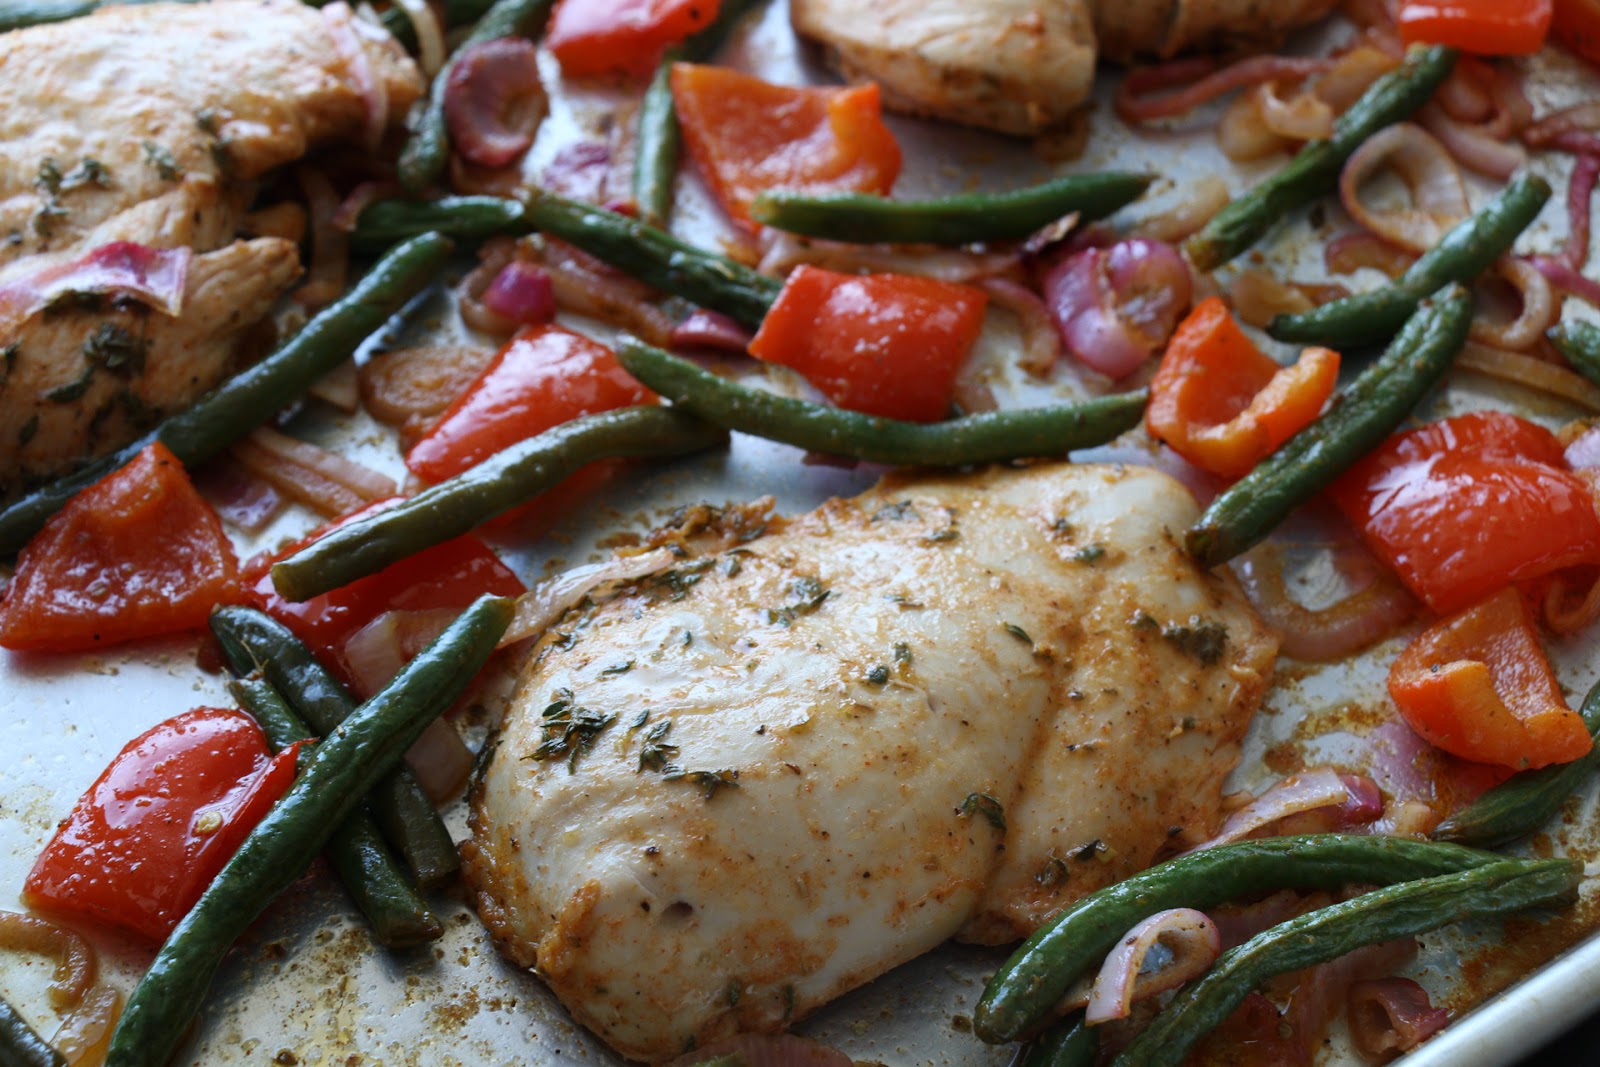 A sheet pan meal featuring seasoned chicken breasts, green beans, red bell pepper chunks, and sliced red onions, all roasted together with visible herbs.